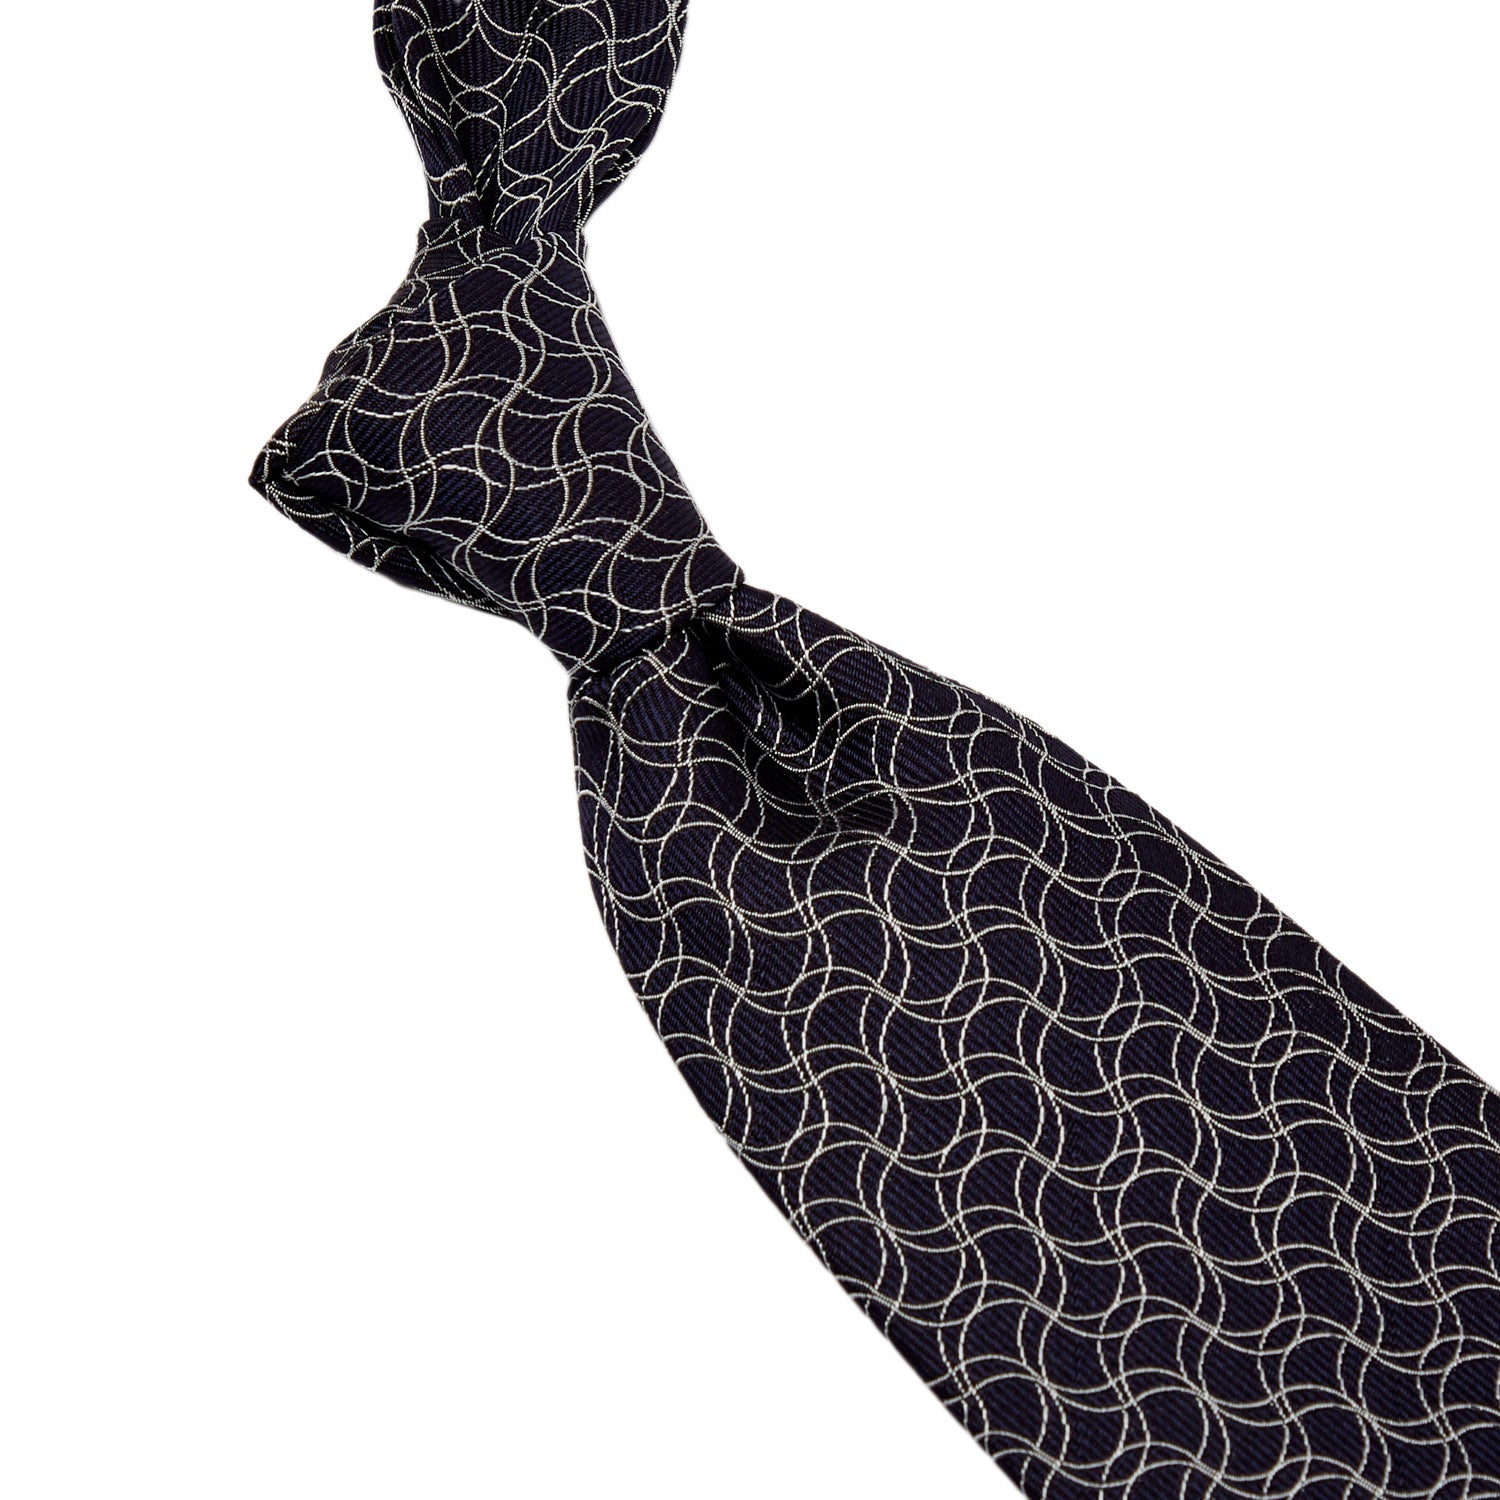 Sovereign Grade Navy and White Swirl Jacquard Tie